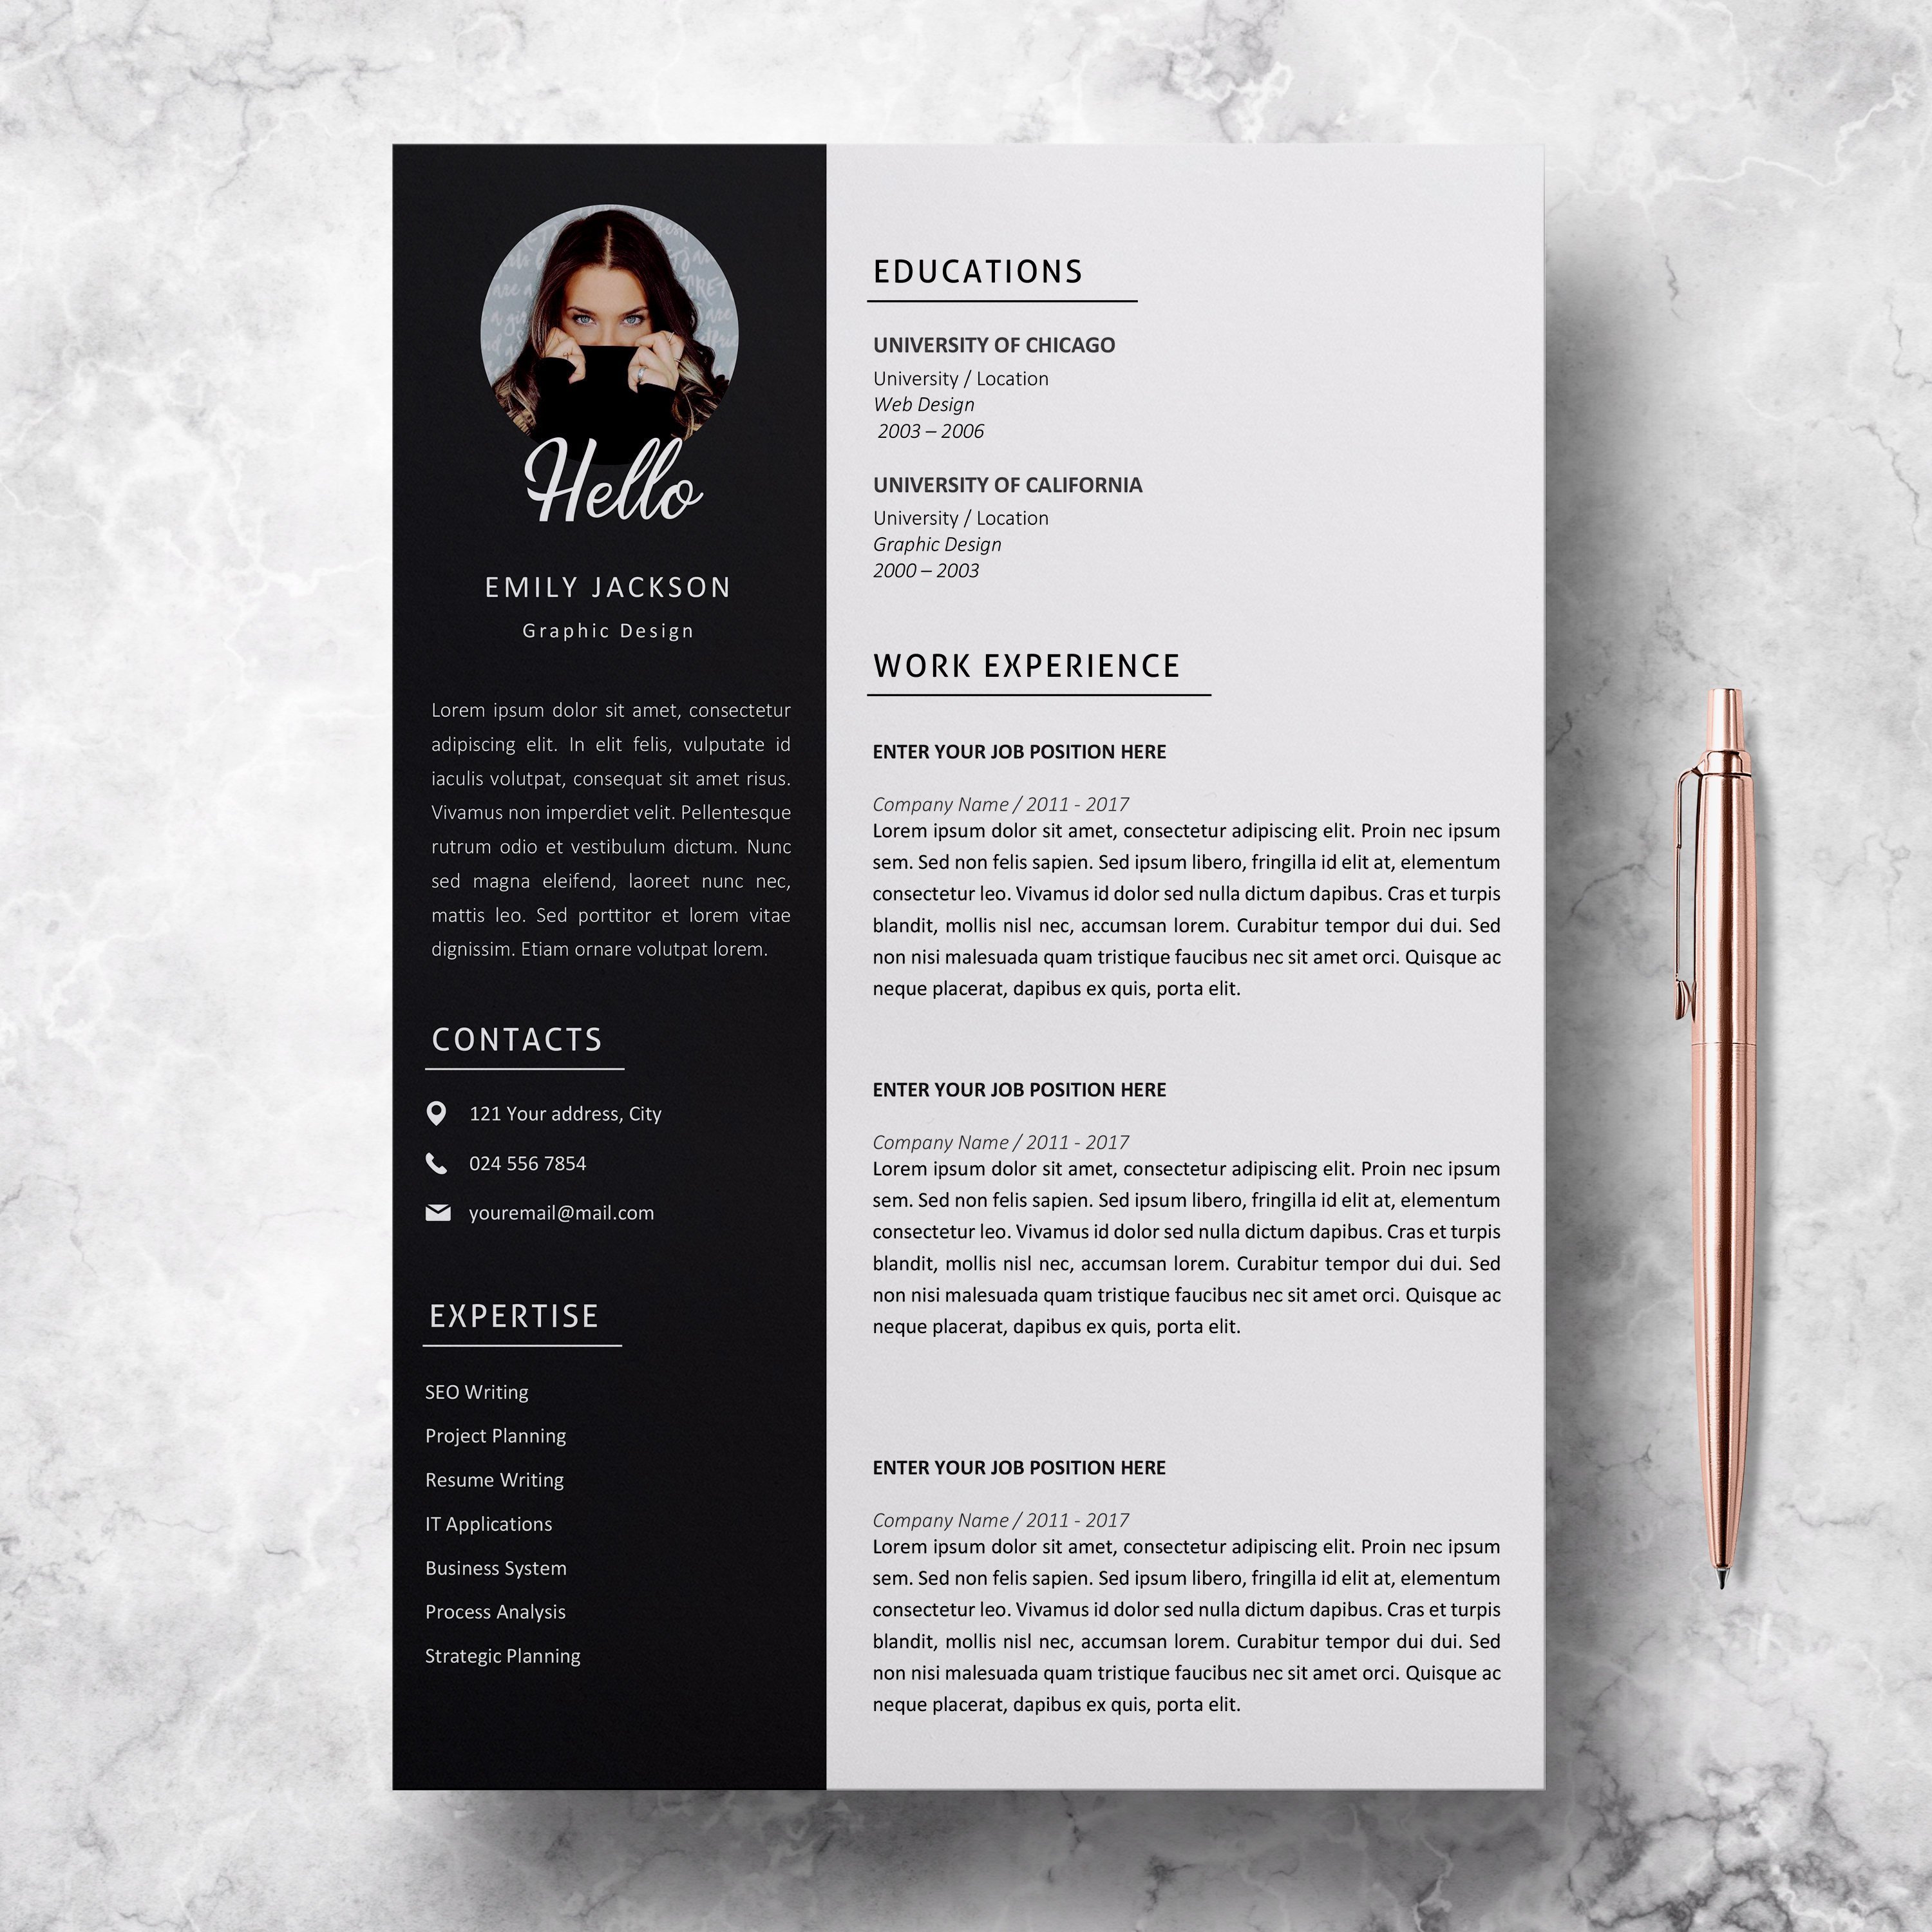 Resume | CV Template + Cover Letter cover image.